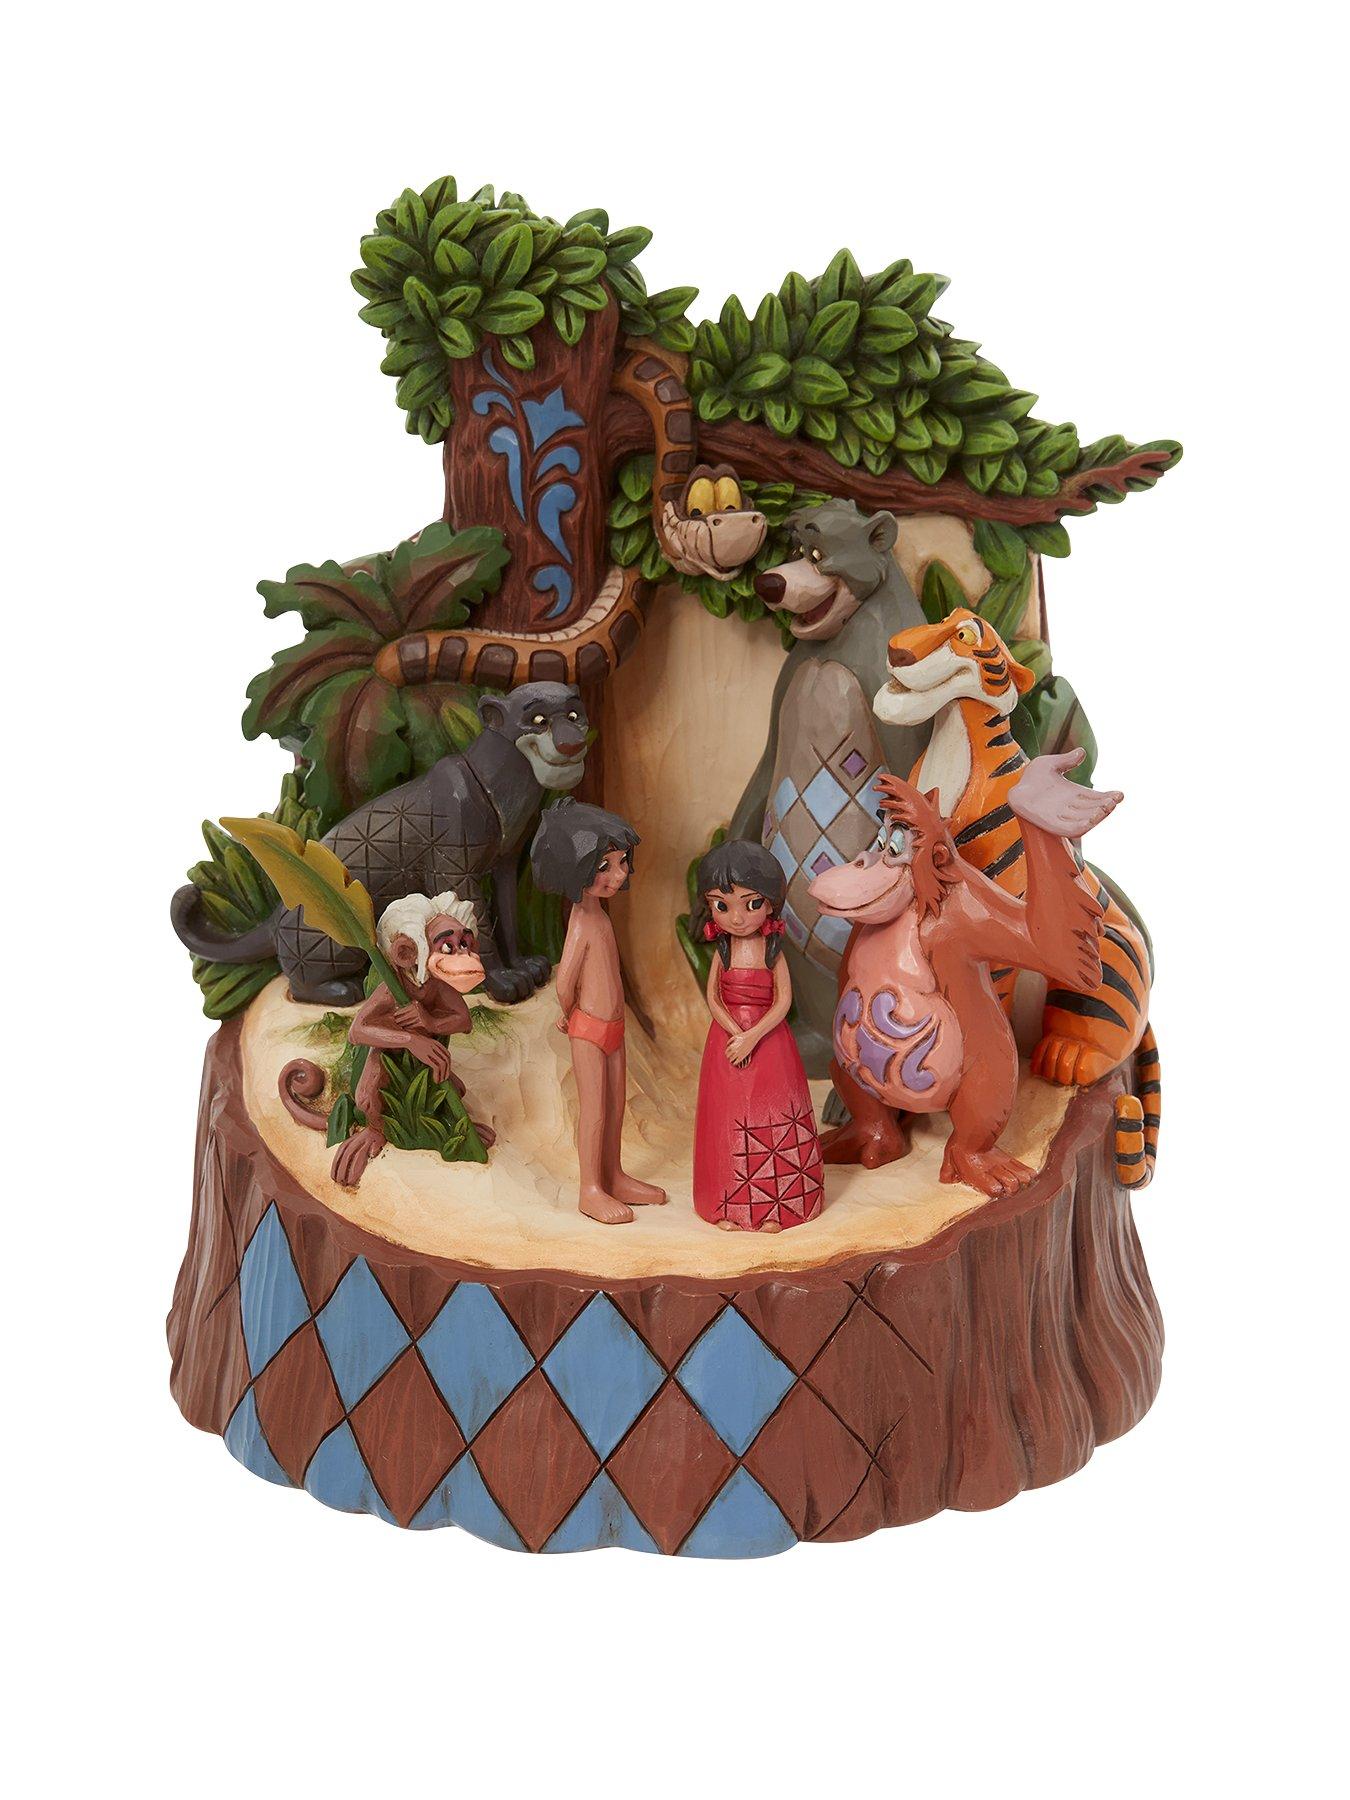 Disney Traditions Jungle Book Carved by the Heart (55th Anniversary 2022)